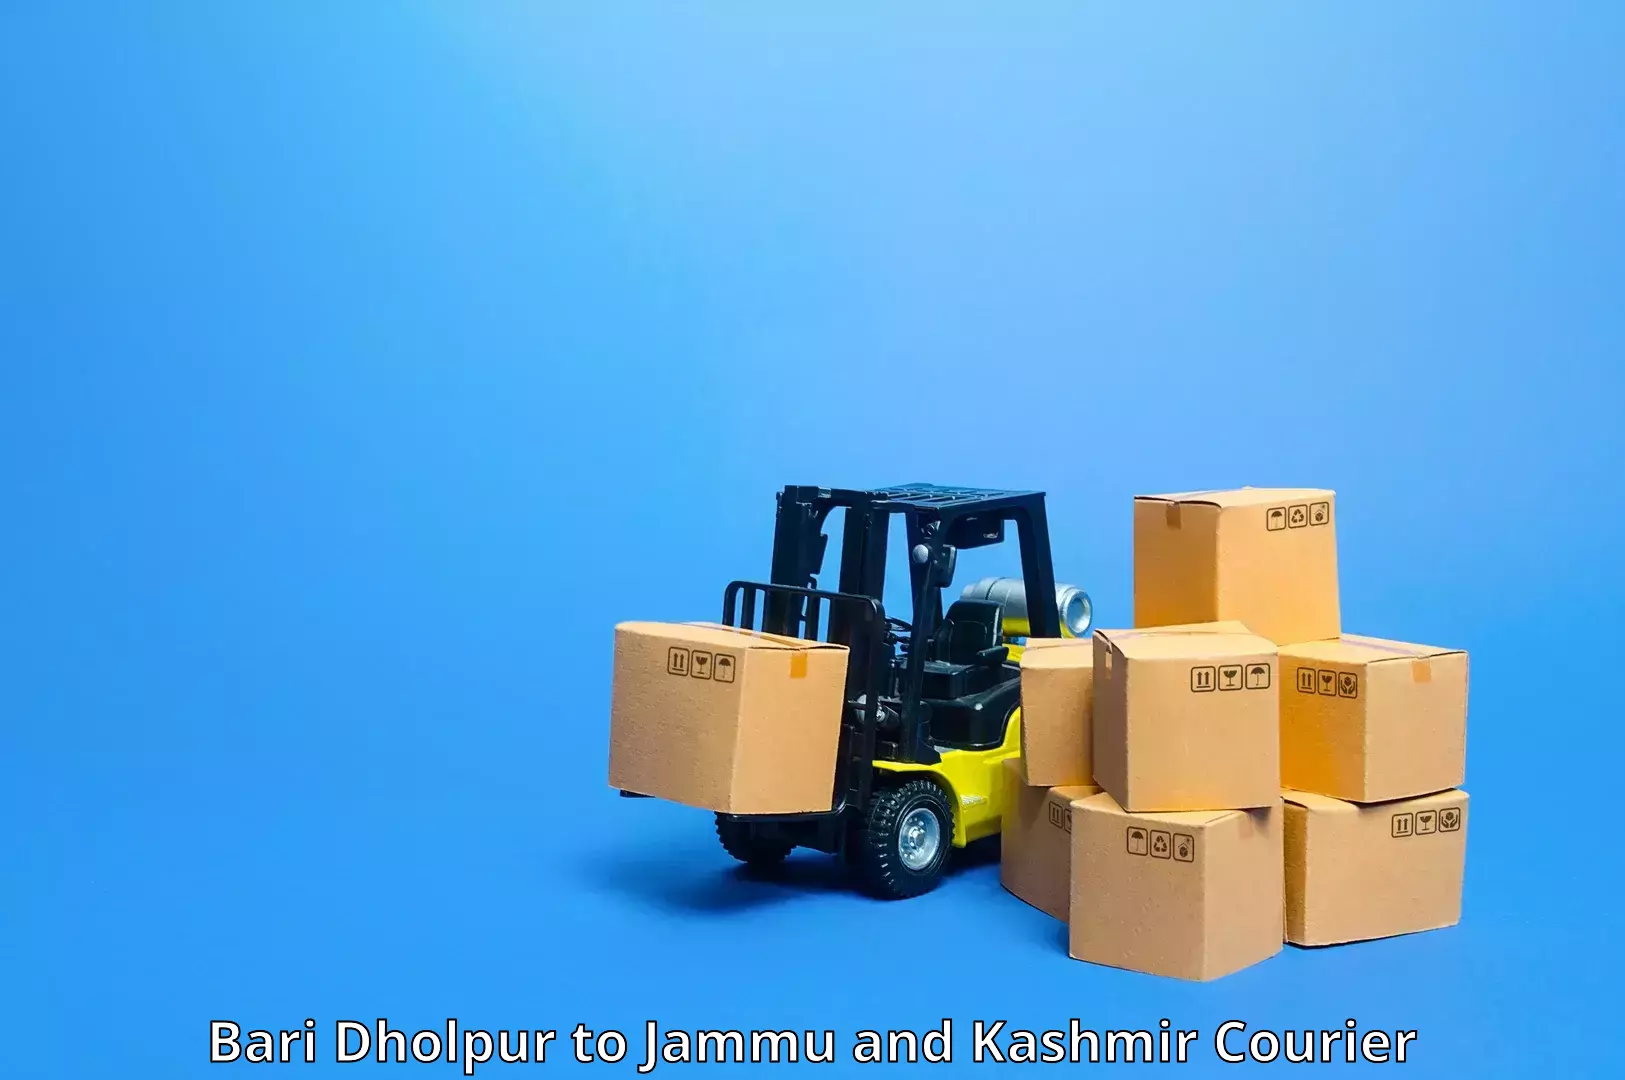 Nationwide shipping capabilities in Bari Dholpur to Jammu and Kashmir